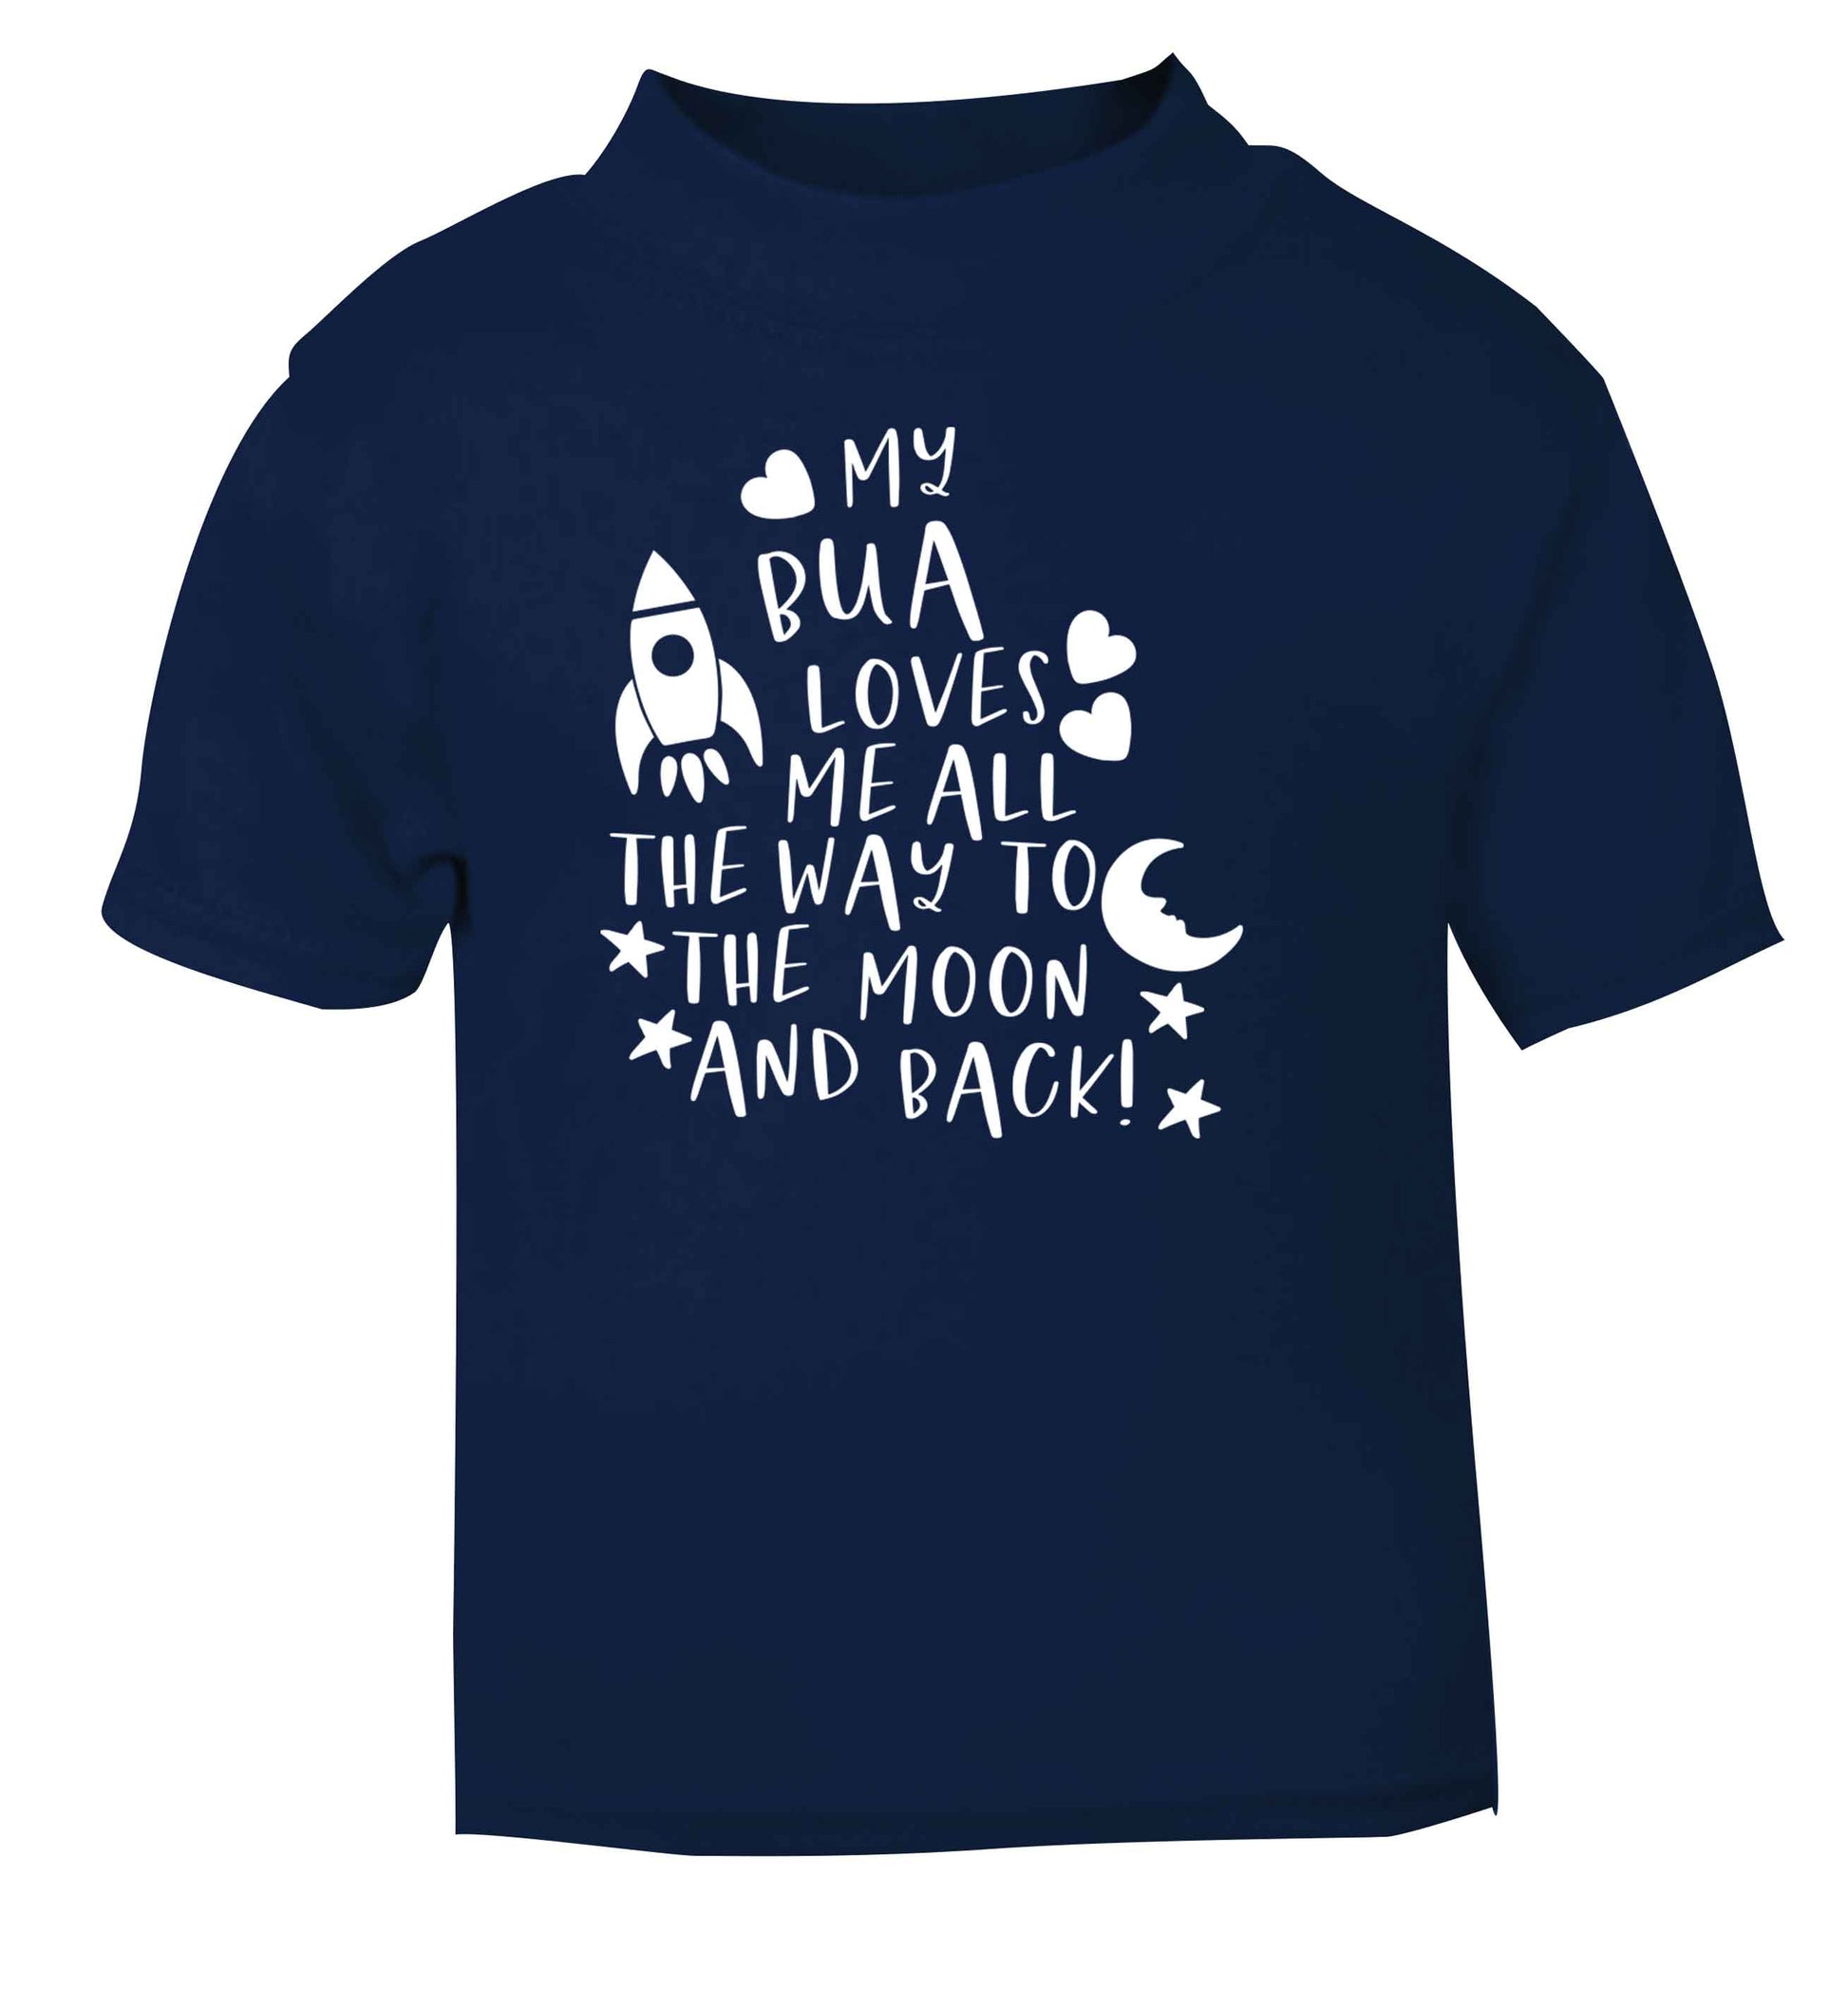 My bua loves me all they way to the moon and back navy Baby Toddler Tshirt 2 Years